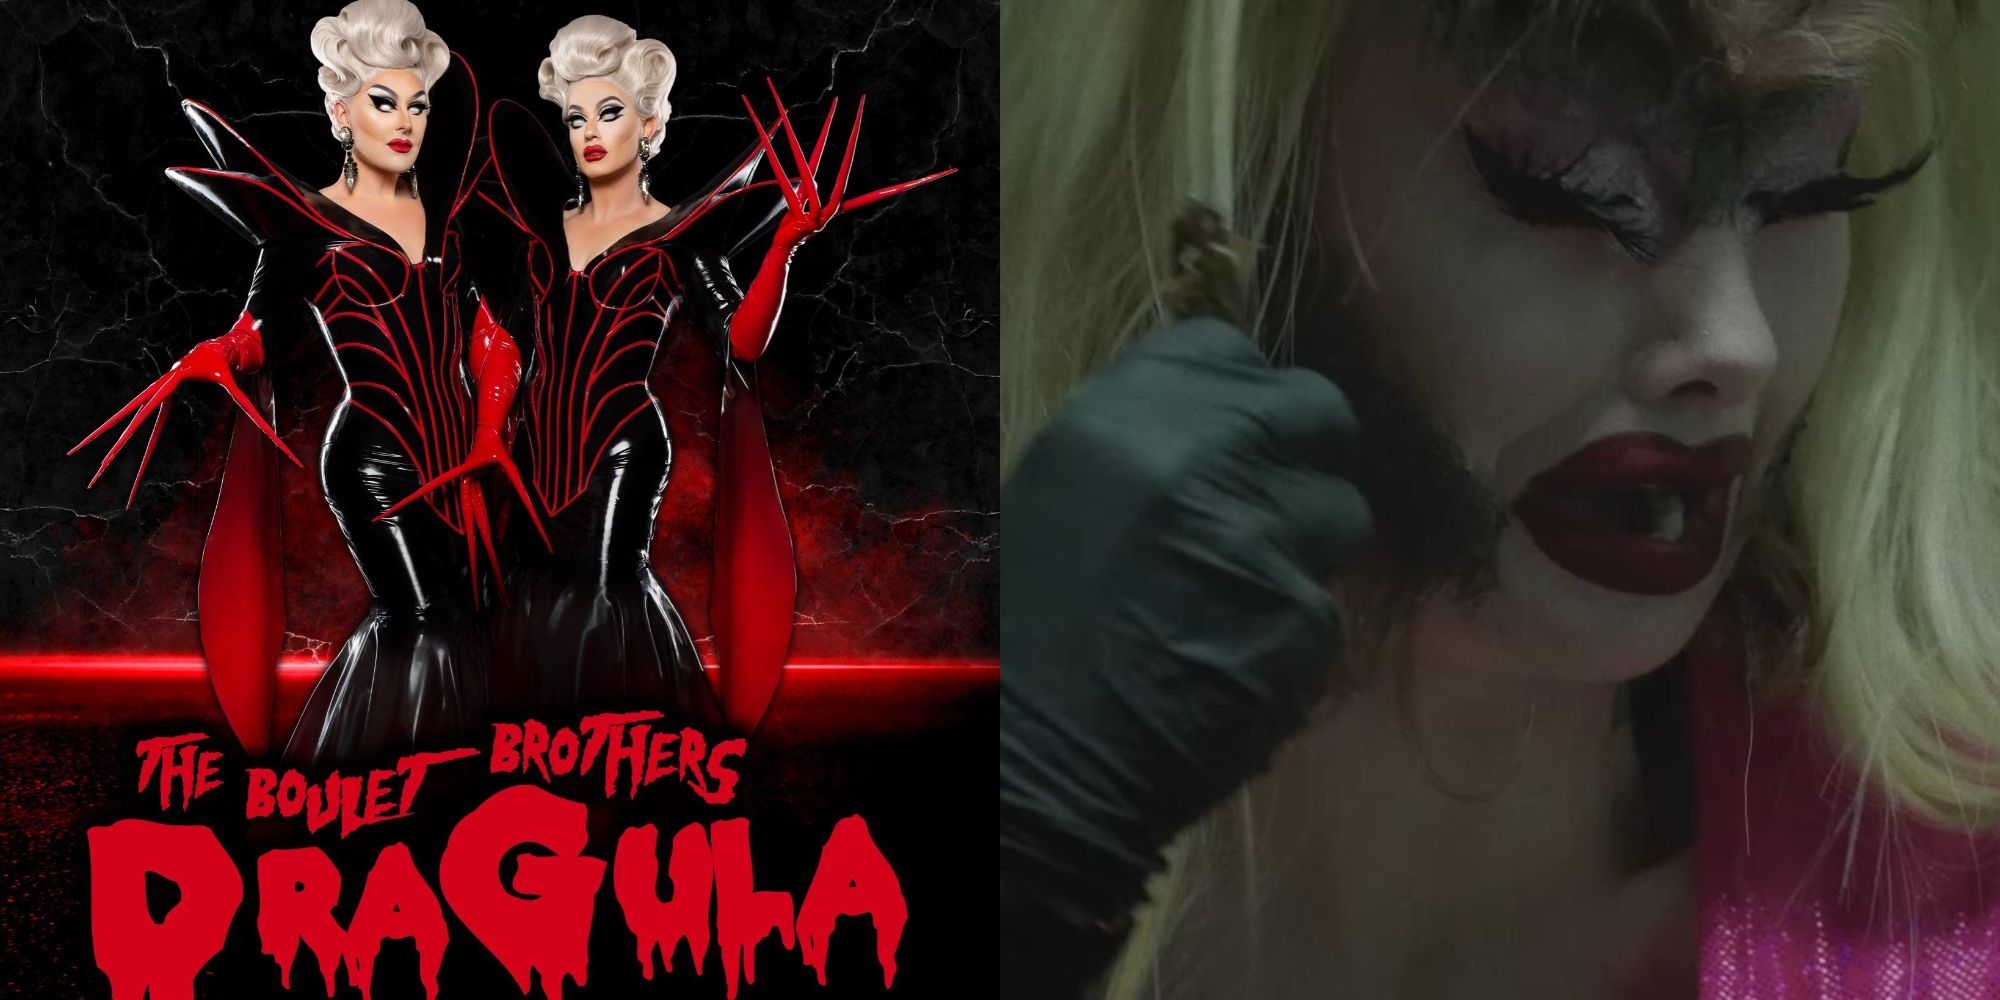 Split image showing the Boulet Brothers and a contestant in The Boulet Brothers' Dragula.